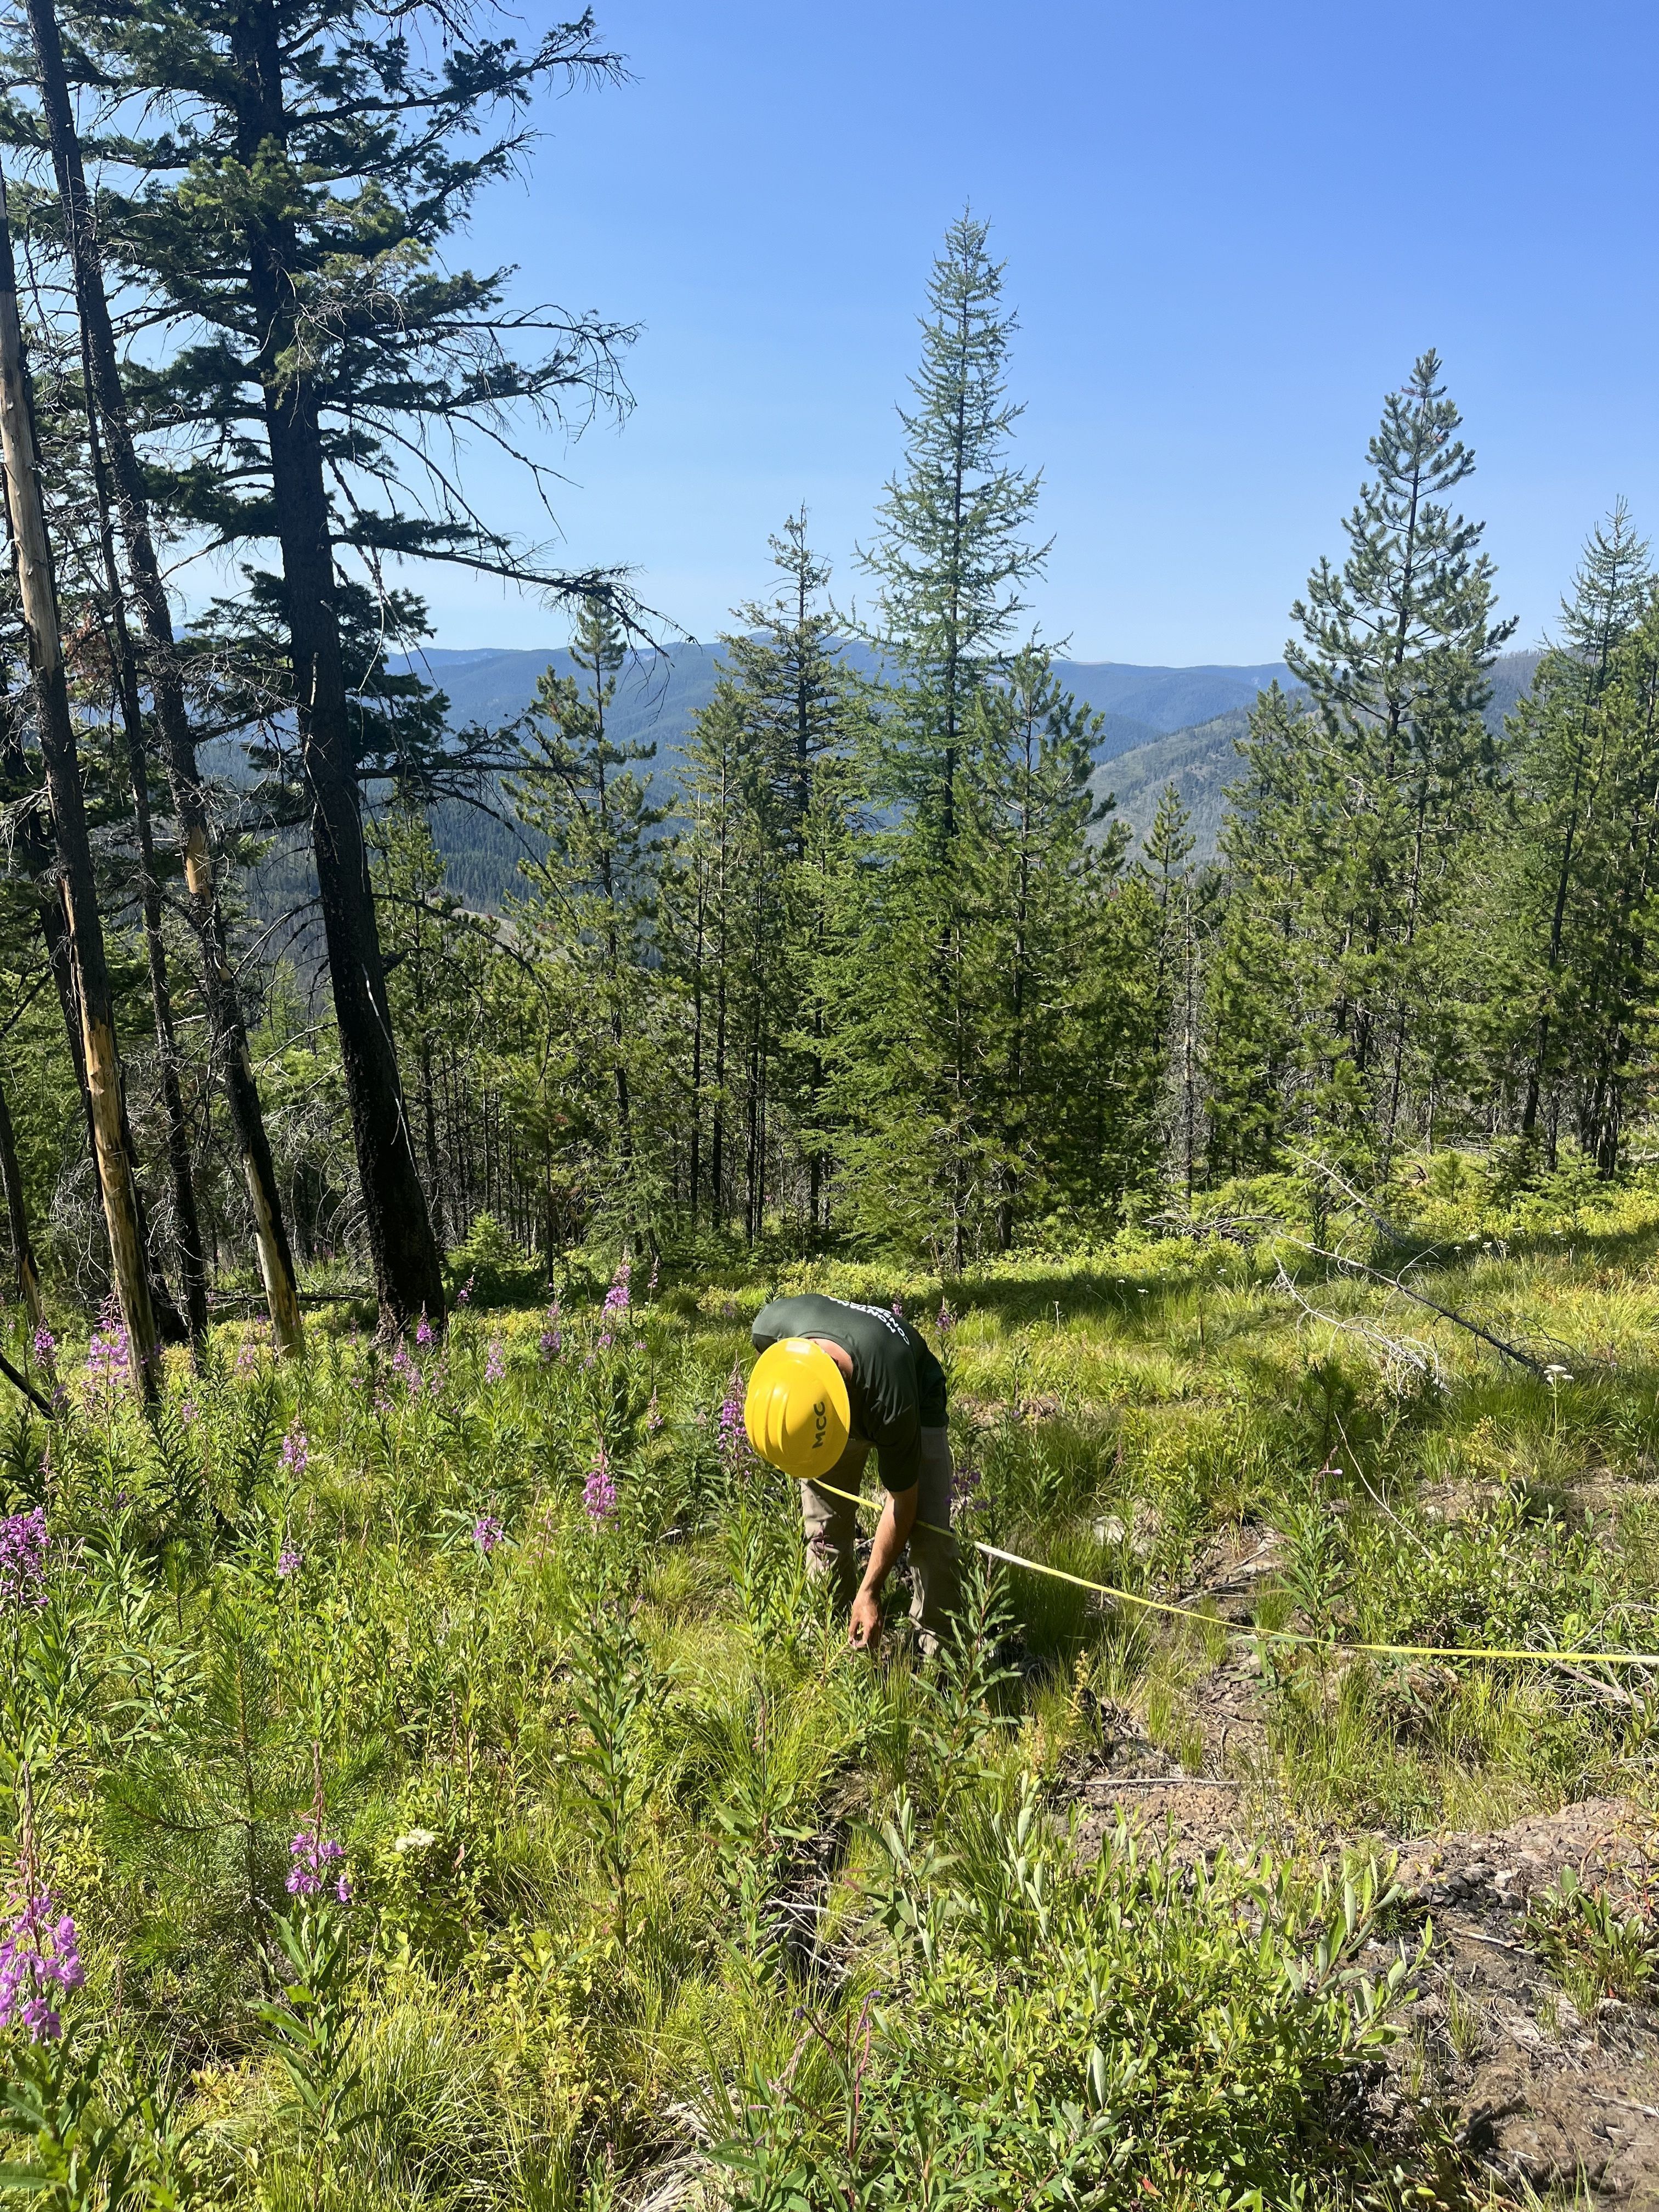 A crew member holds a measuring tape and bends down to survey a tree in the grass.